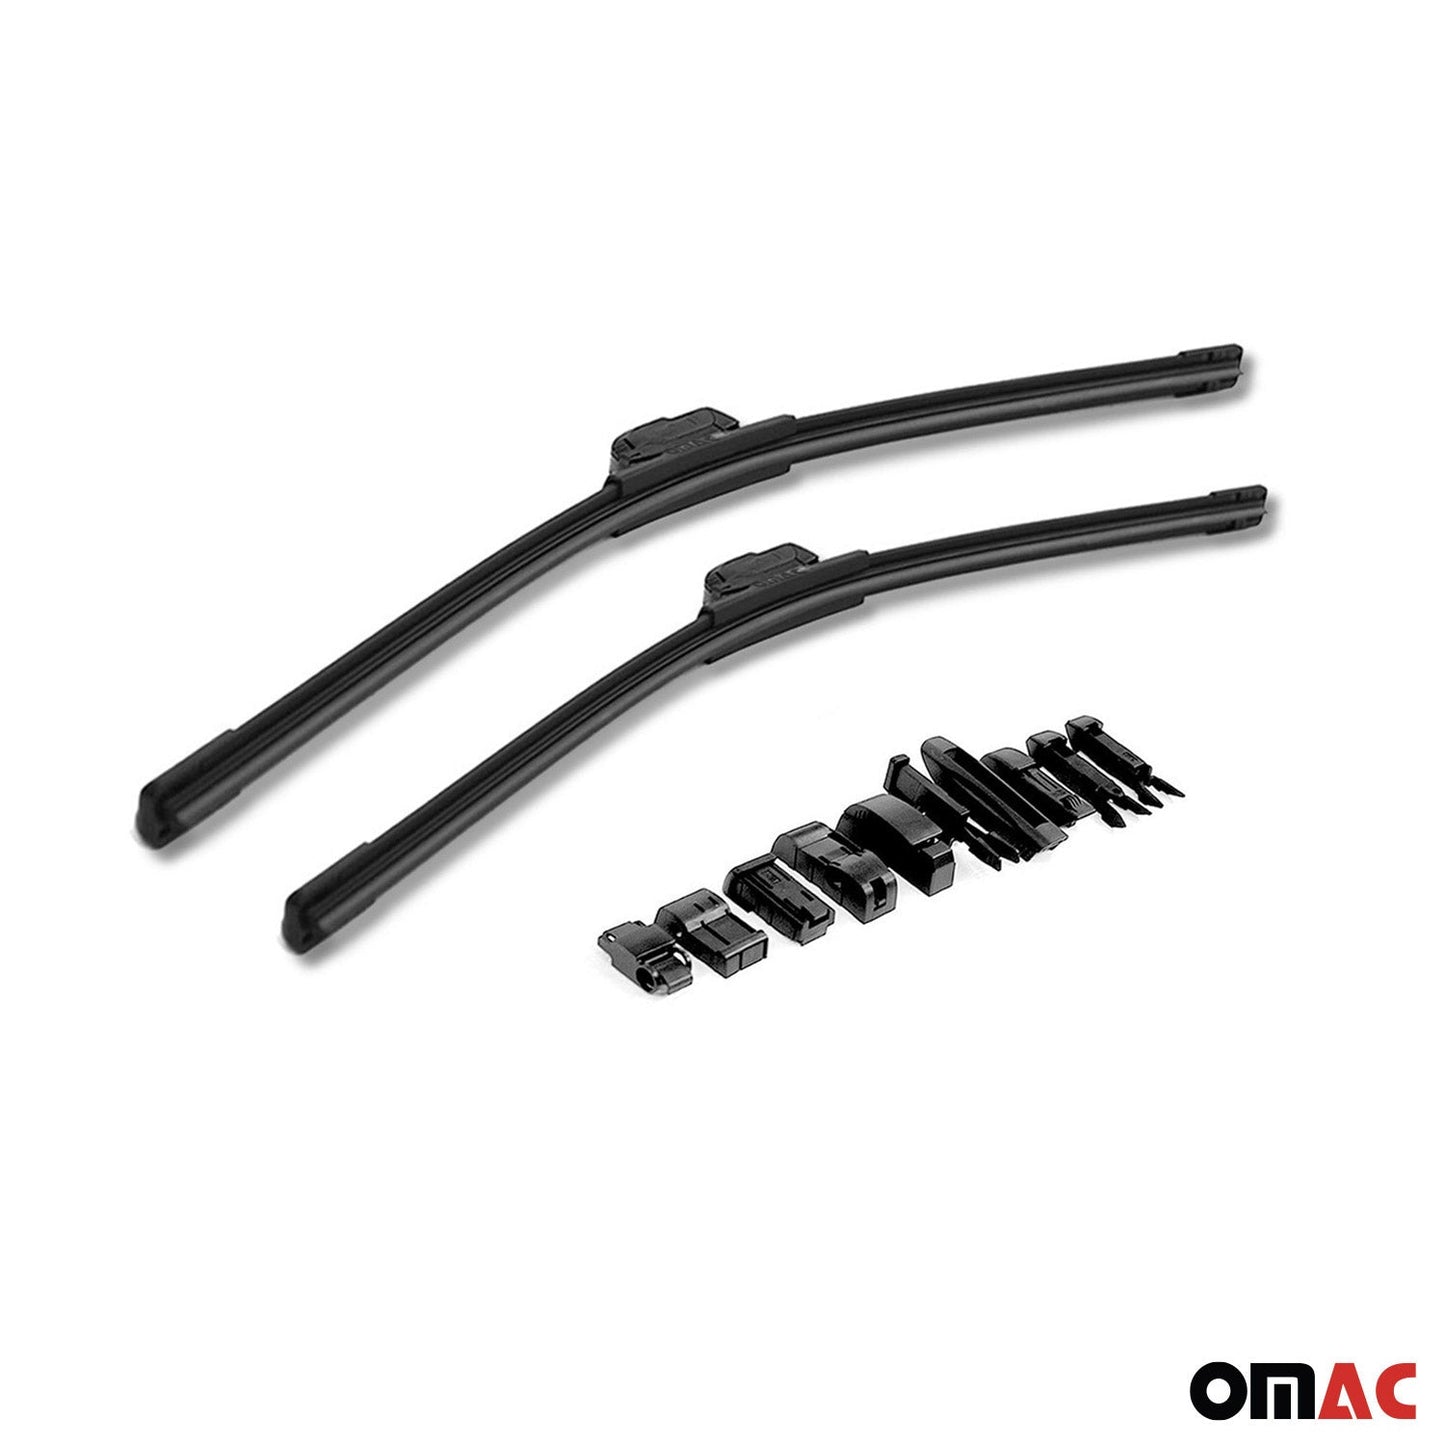 OMAC Front Windshield Wiper Blades Set for Cadillac Escalade 2002-2015 A046626